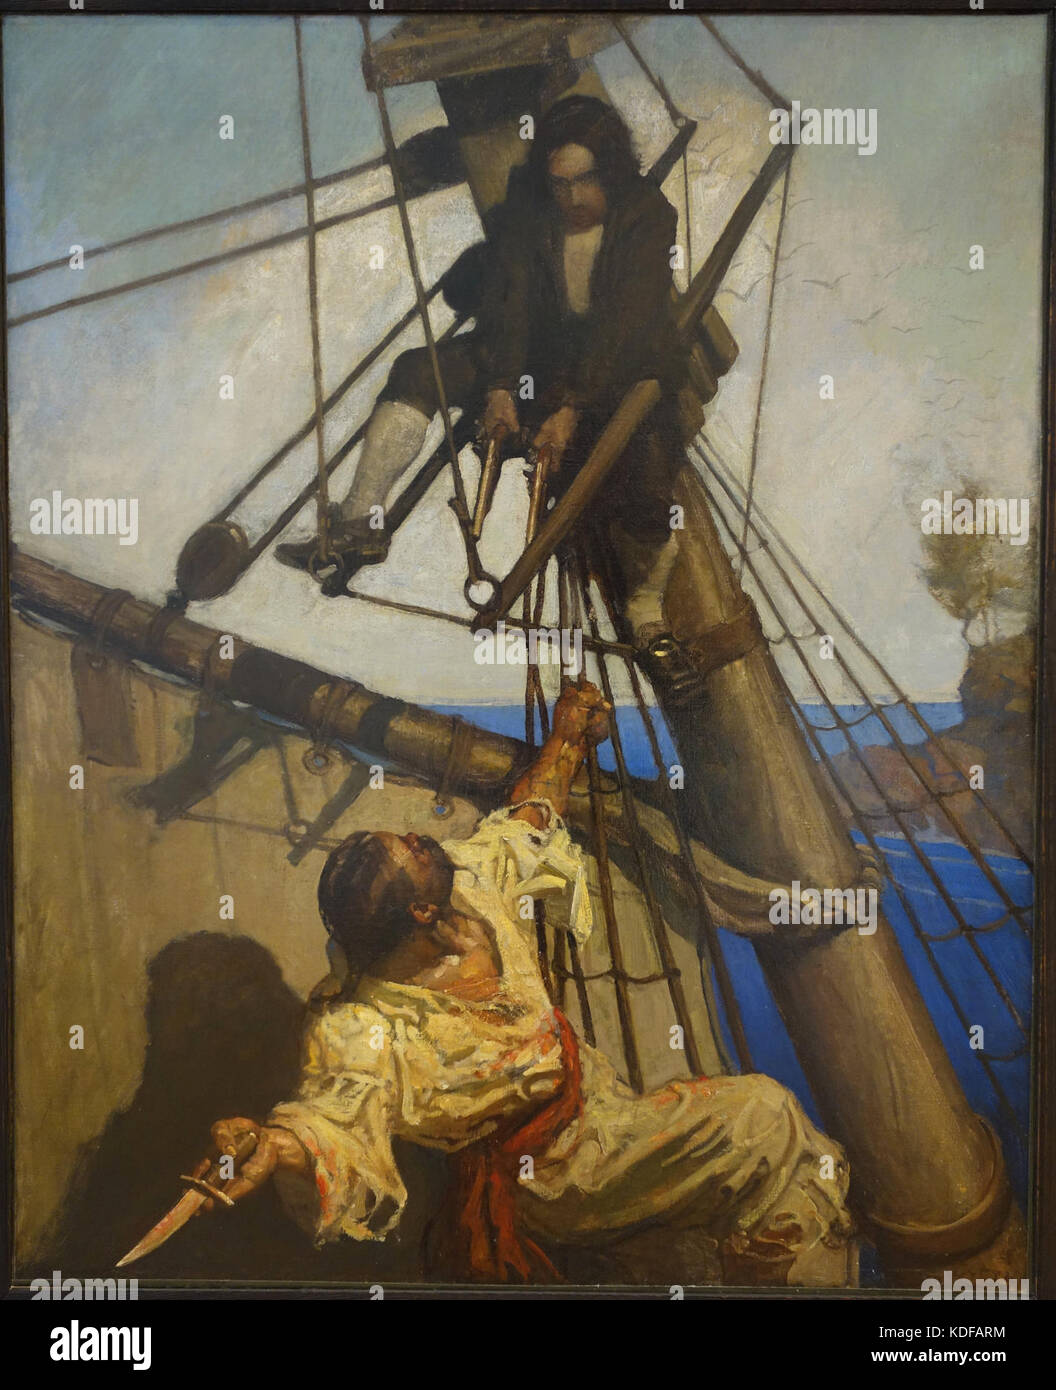 One More Step, Mr. Hands, said I, And I'll Blow Your Brains Out, by N. C. Wyeth, for Treasure Island, Scribner's Classics, 1911   New Britain Museum of American Art   DSC09077 Stock Photo